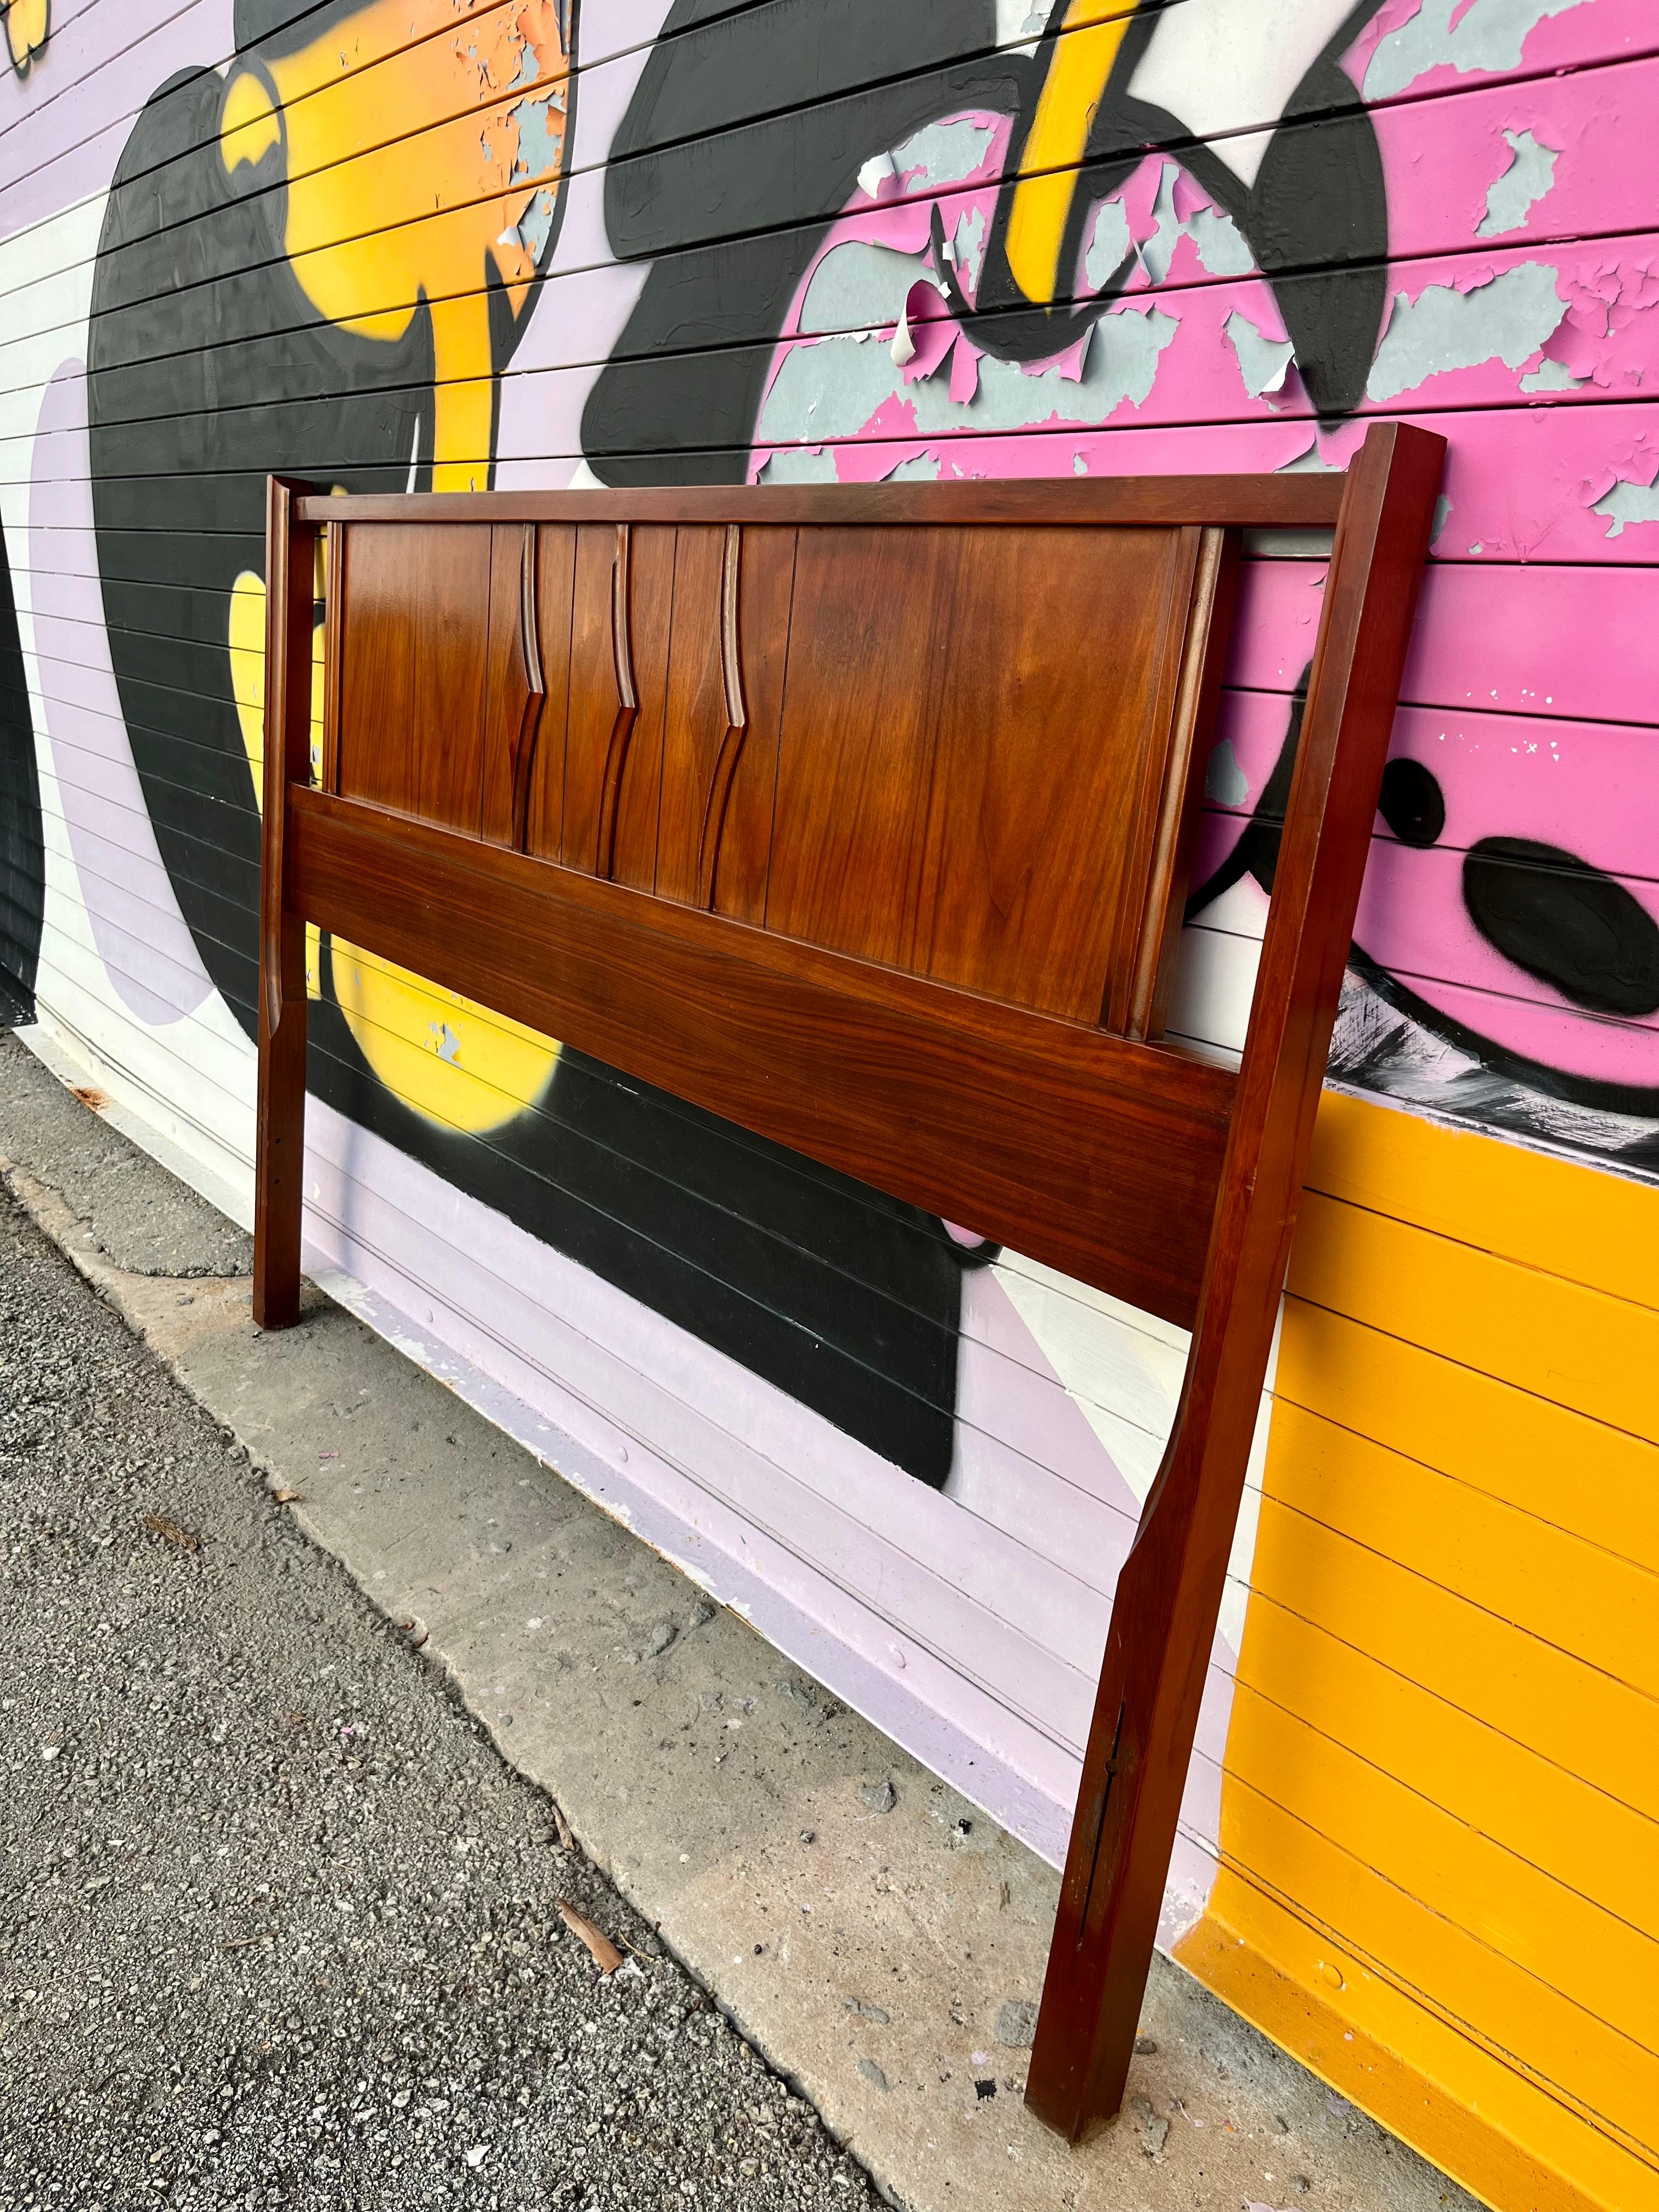 Vintage Mid Century Modern Full Size Headboard by Coleman of Virginia. Circa 1960s
Features a quintessential American mid century modern design with a beautiful walnut wood grain. 
In very good original condition with signs of wear consistent with